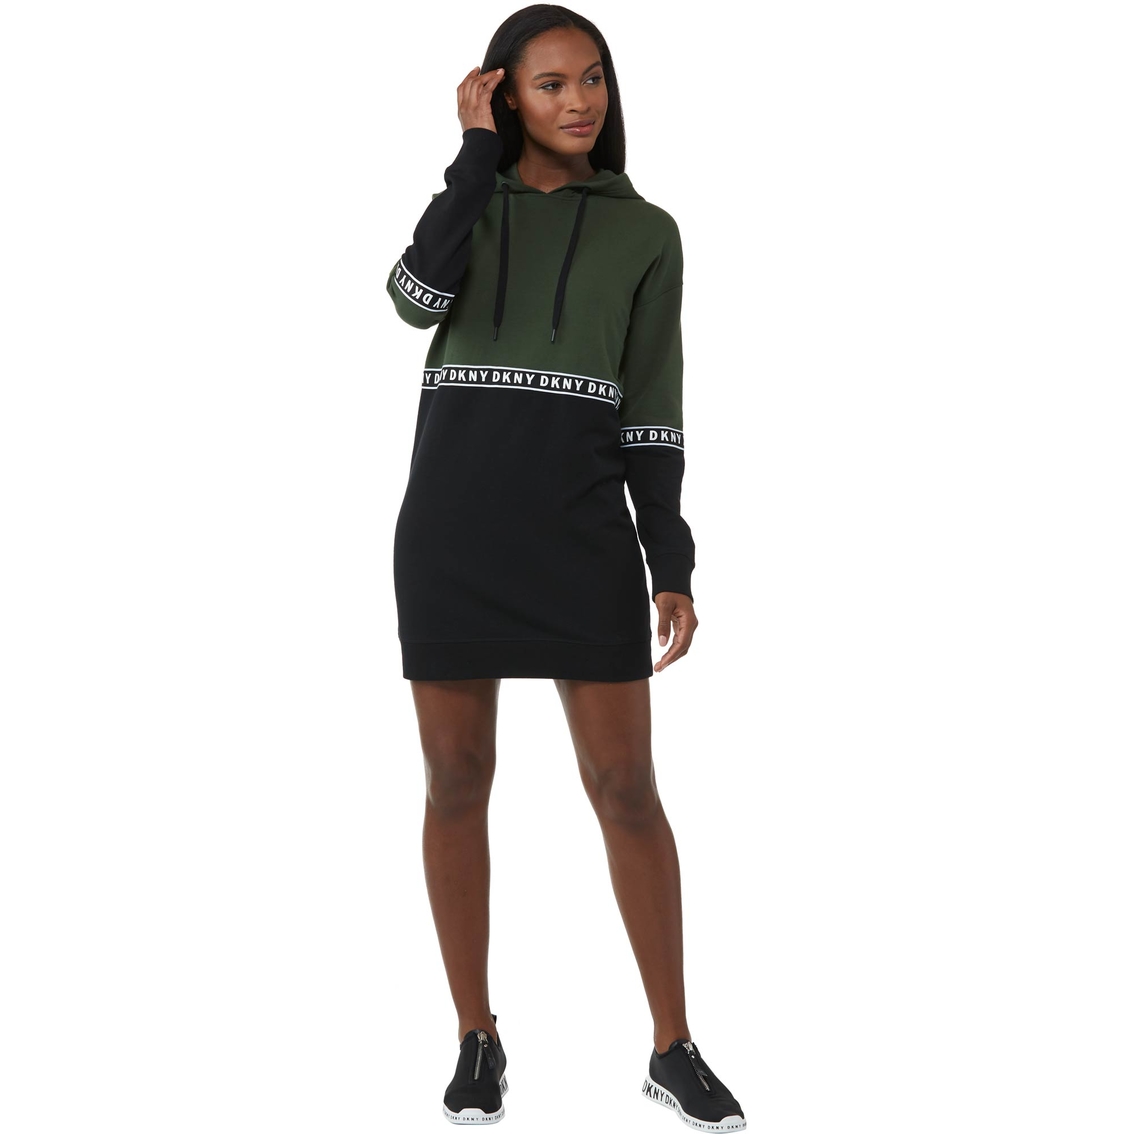 Dkny Sport Boxy Hooded Sweatshirt Dress With Taping | Dresses ...